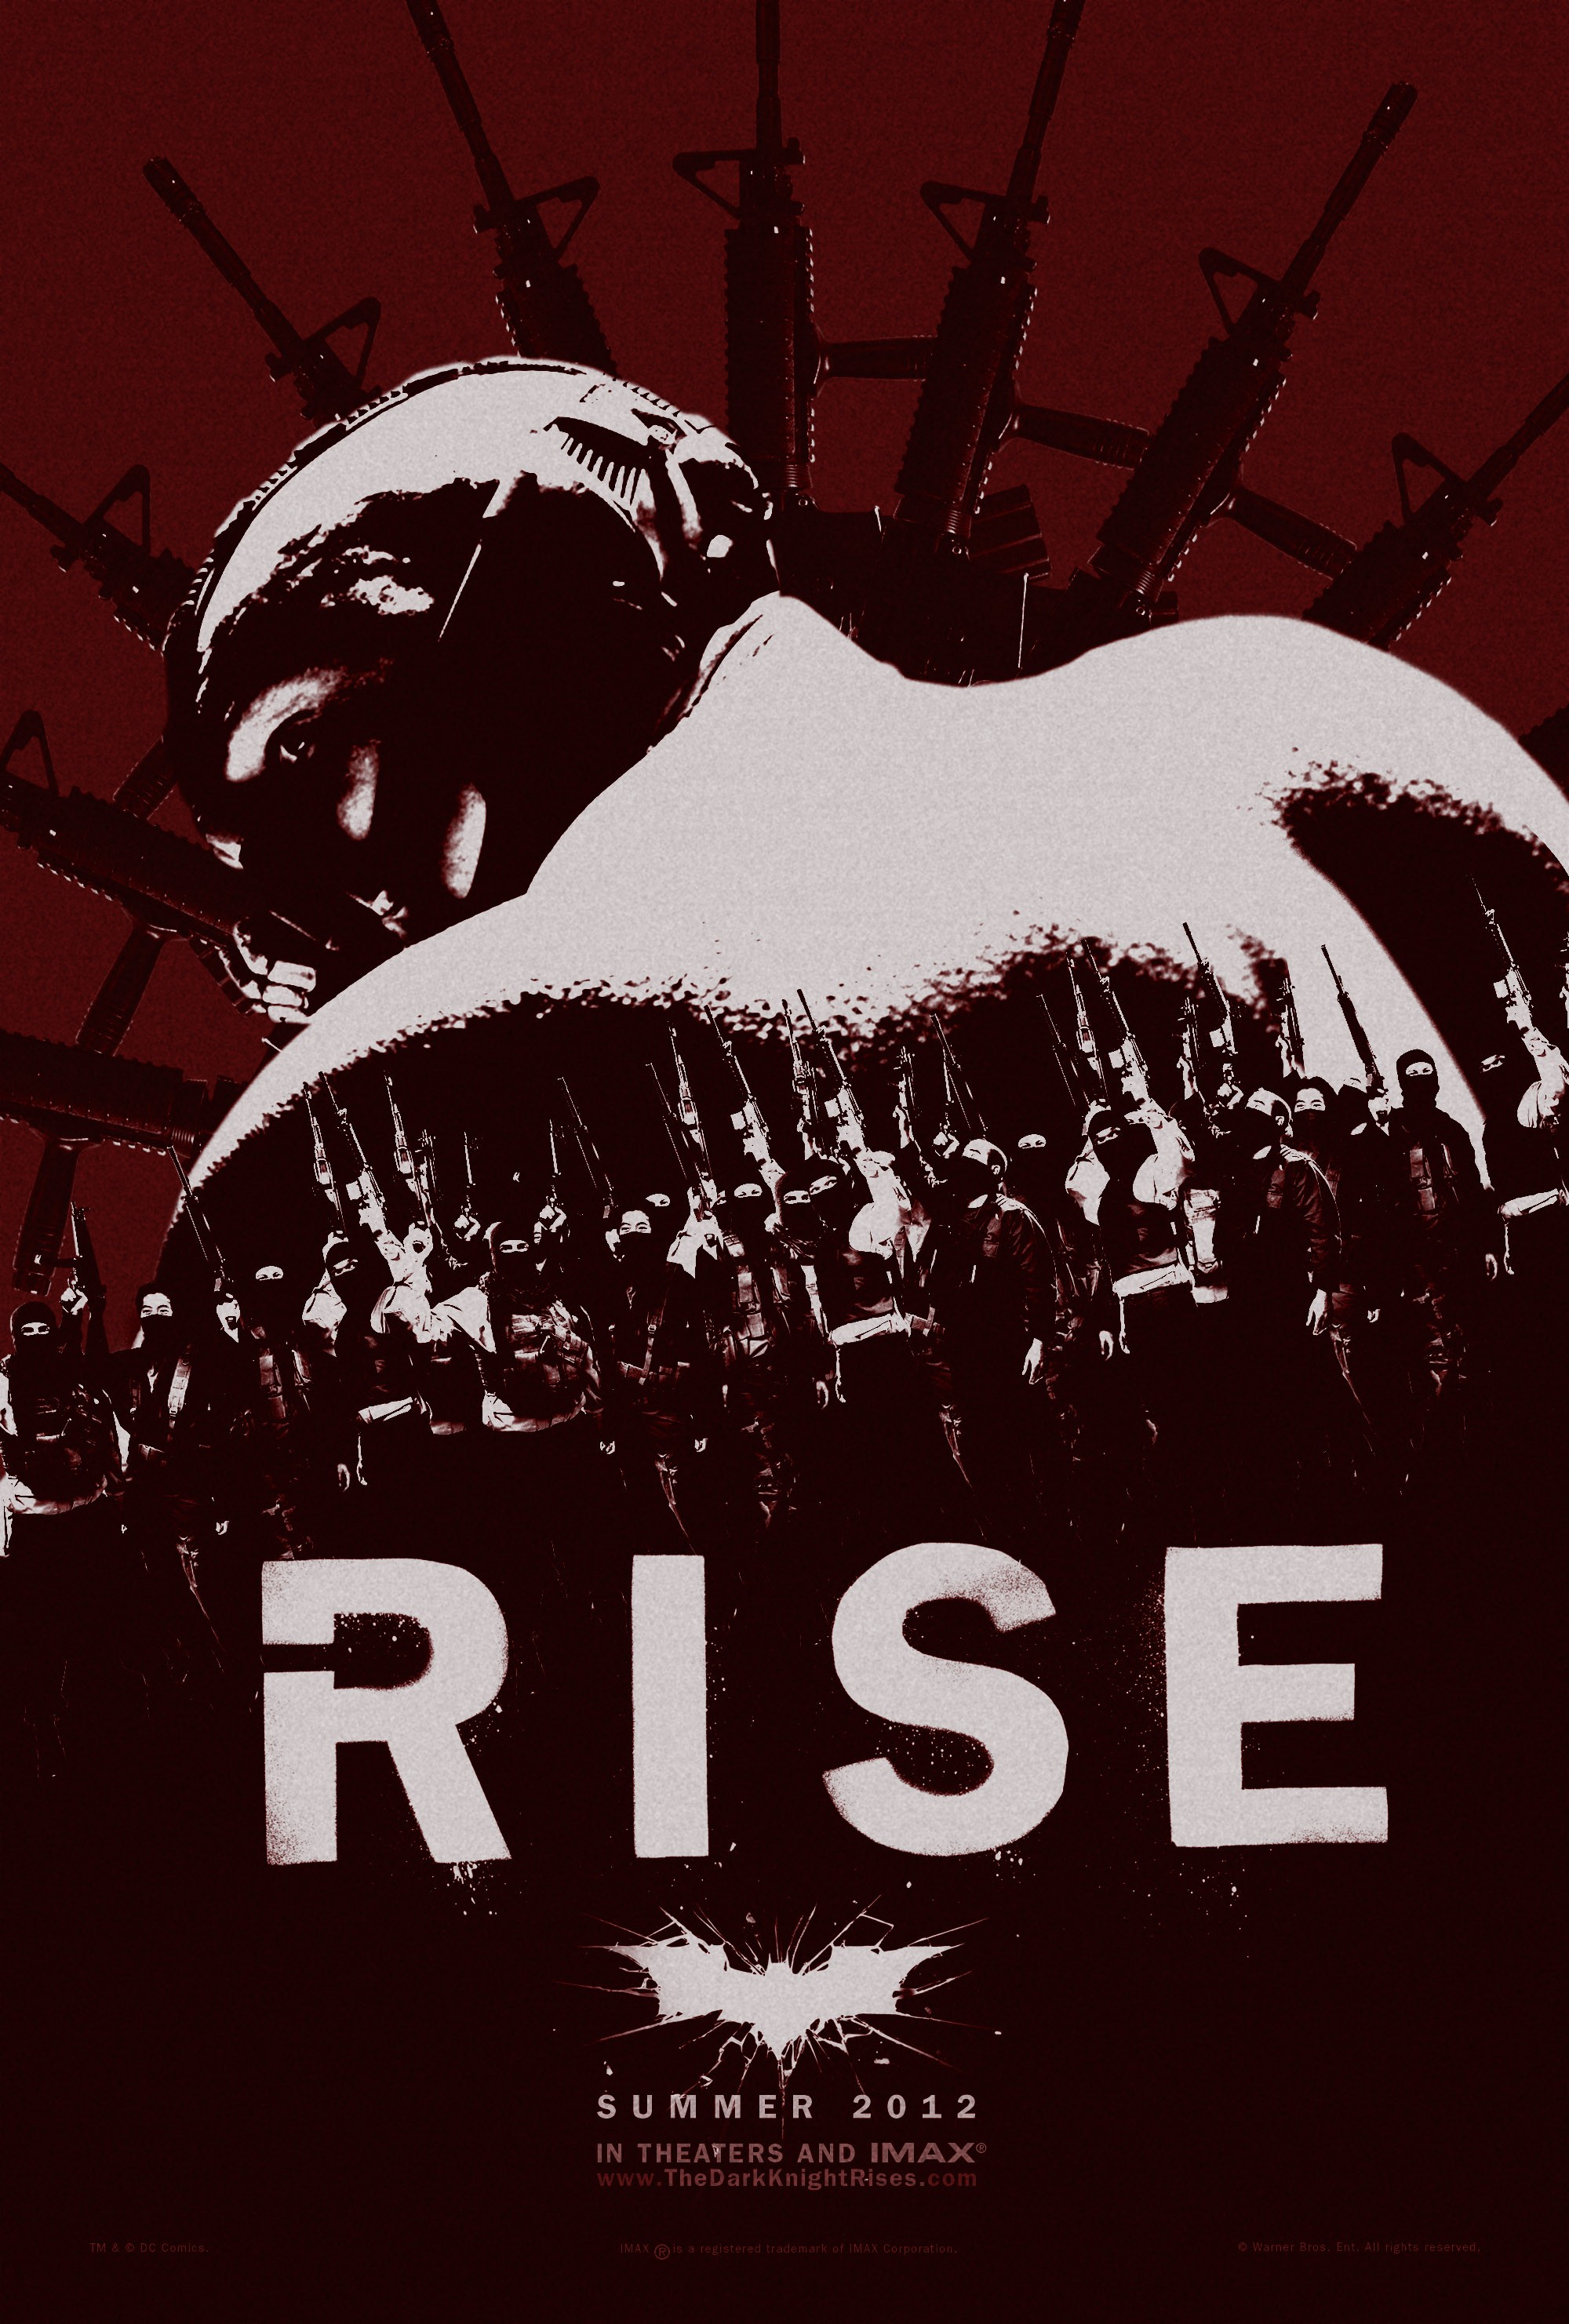 Three New Posters for The Dark Knight Rises – The Reel Bits